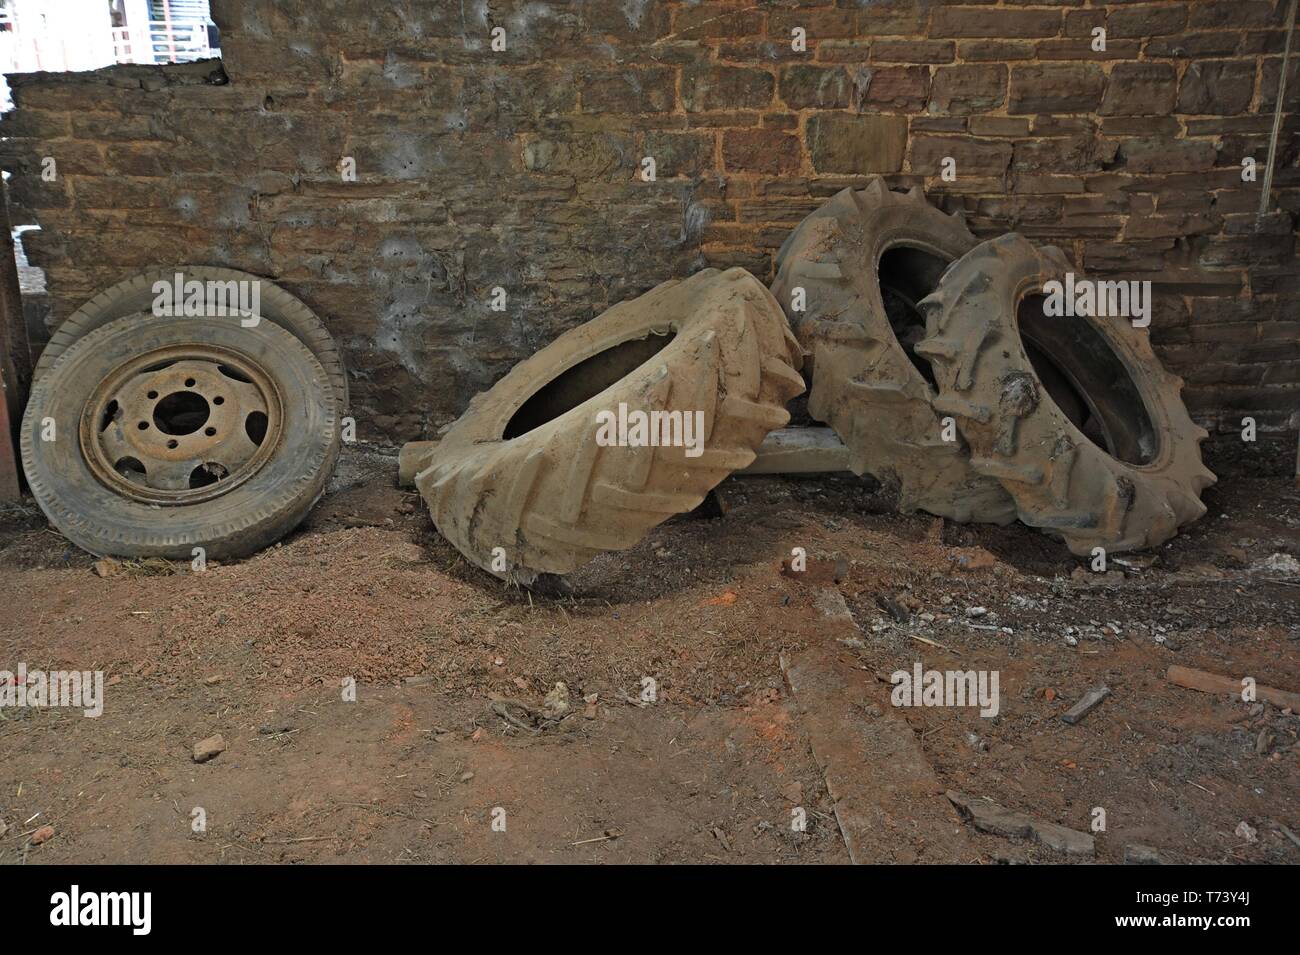 A pile of tyres in old barns and stables at Upper Venn Farm, Herefordshire 27/4/19 Stock Photo